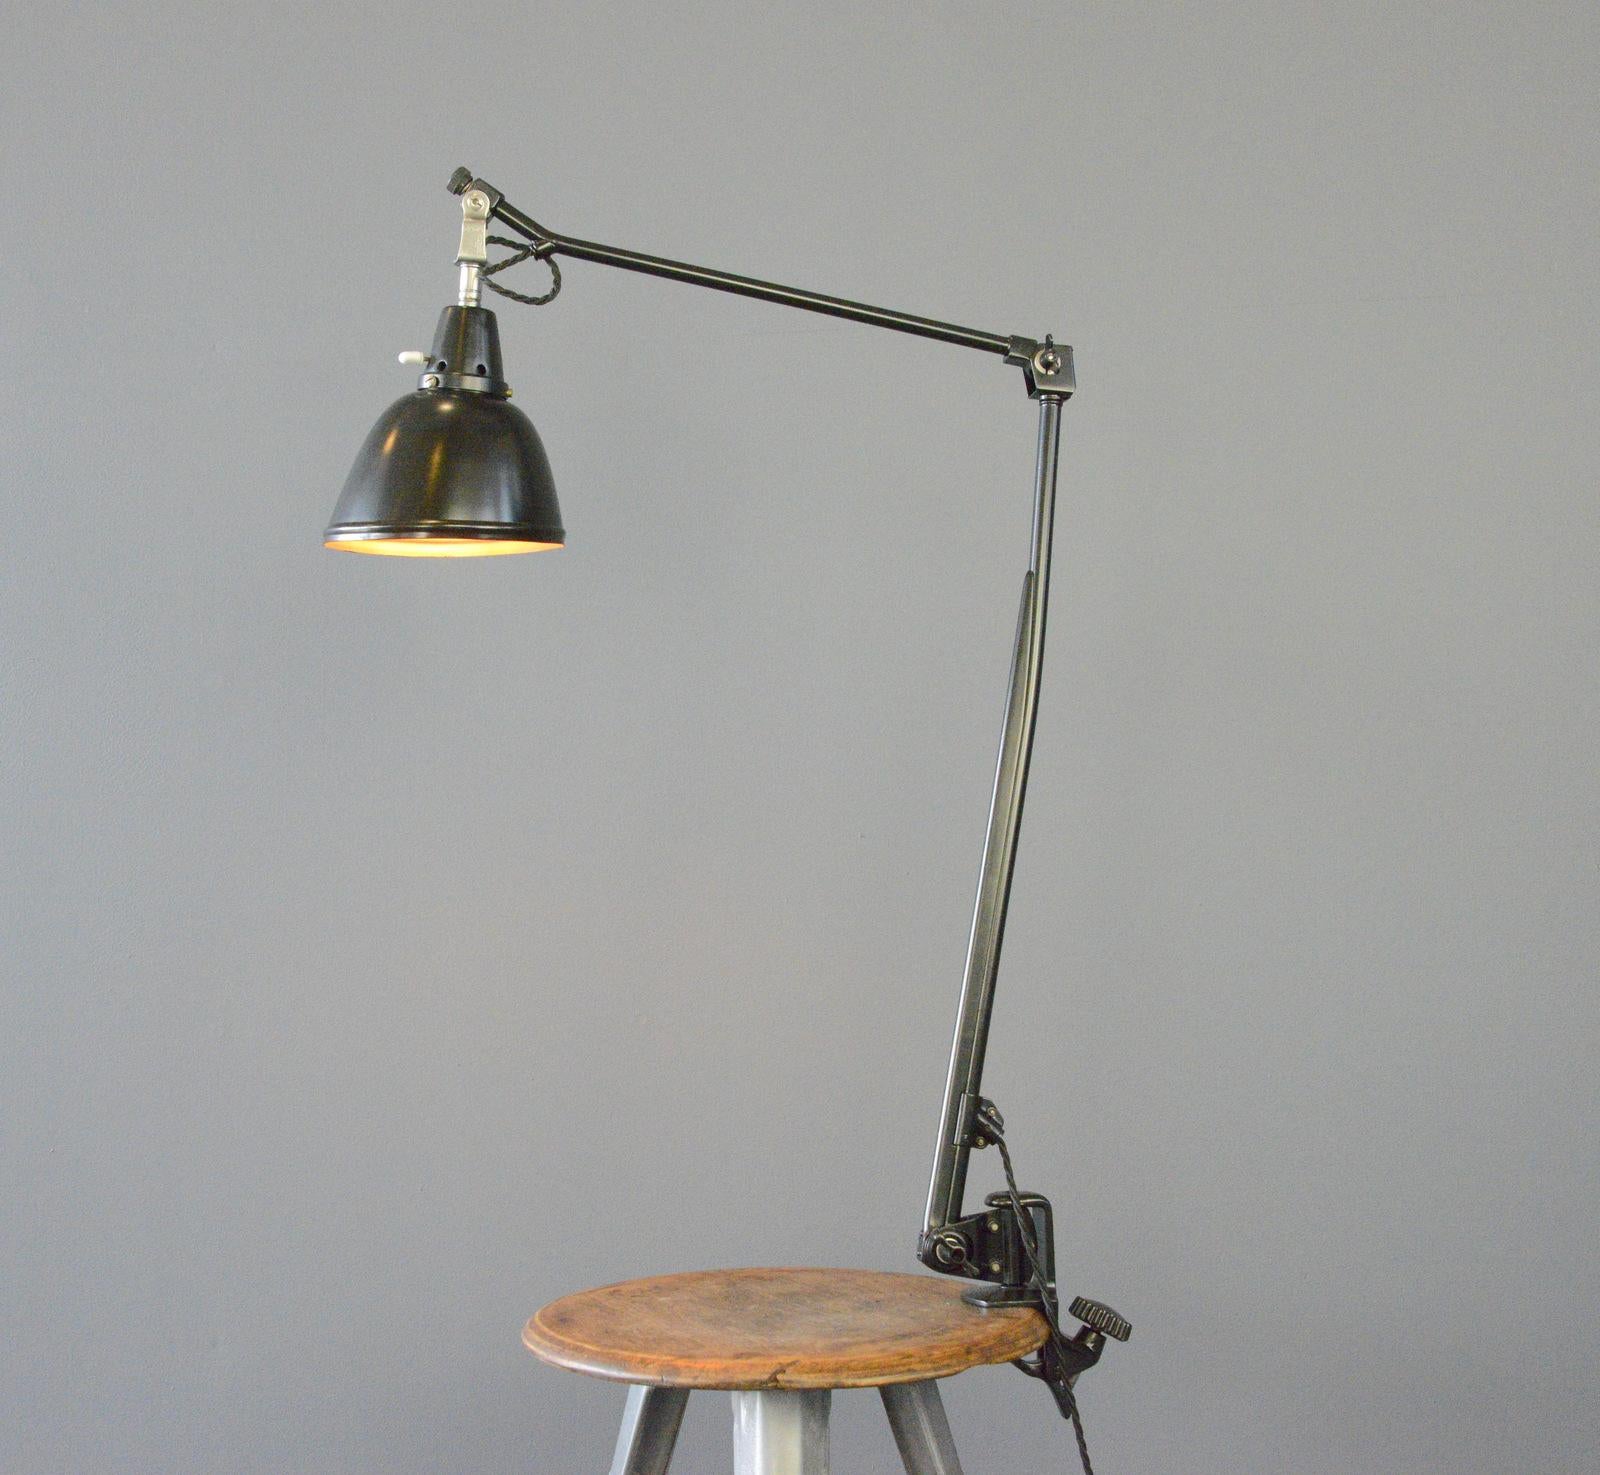 Midgard Typ 114 Table Lamp By Curt Fischer Circa 1930s In Good Condition For Sale In Gloucester, GB